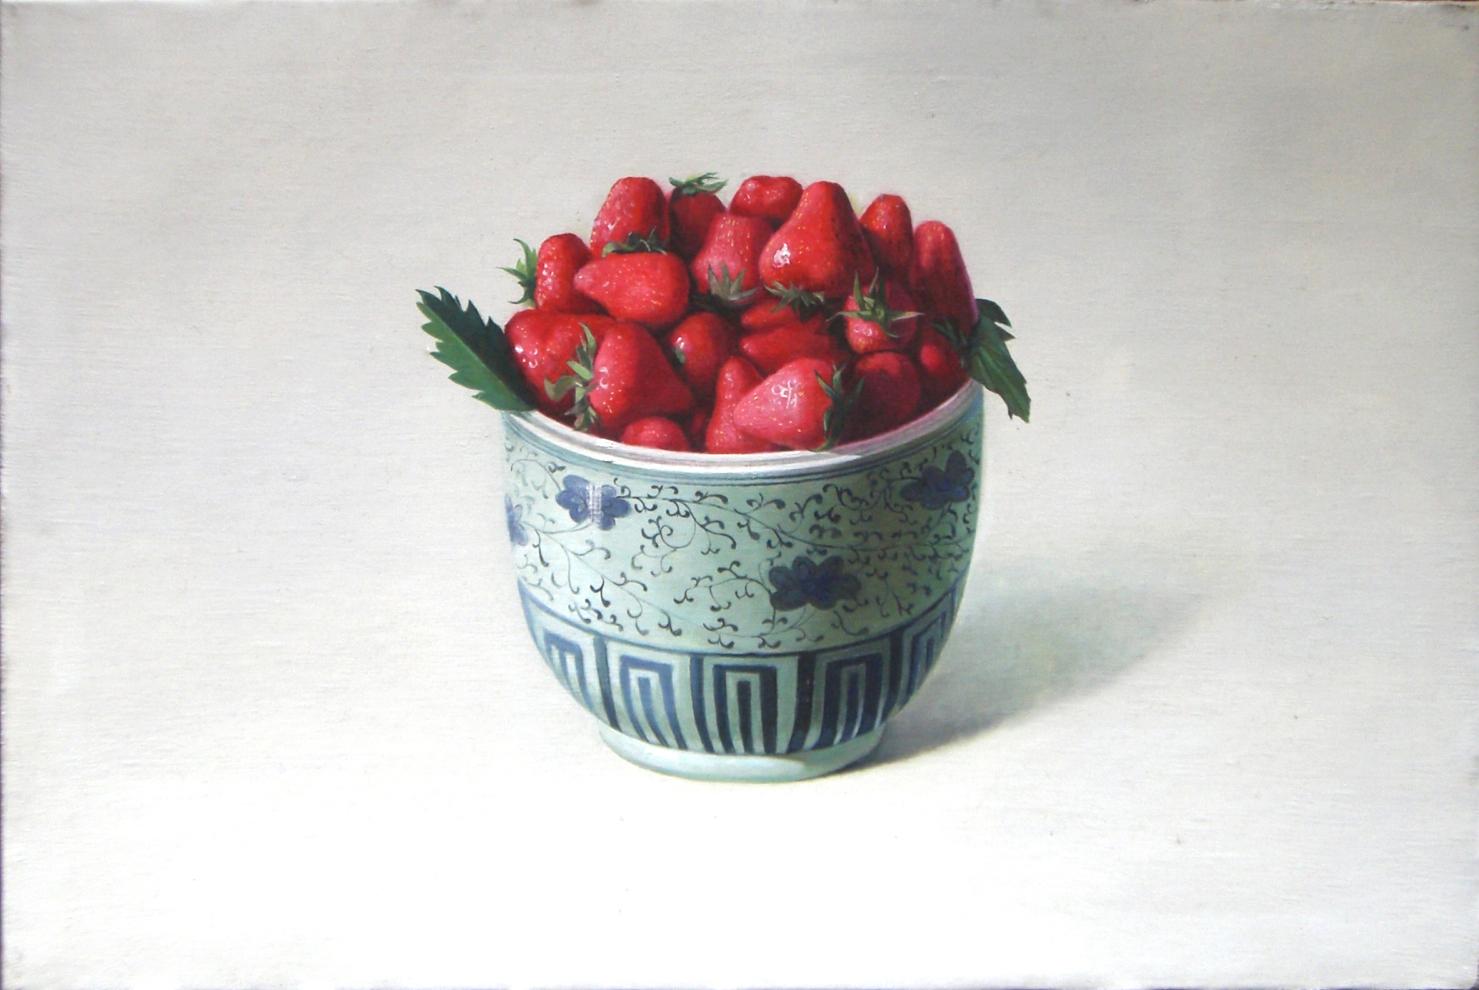 Strawberries - Oil on Canvas by Zhang Wei Guang - 2008